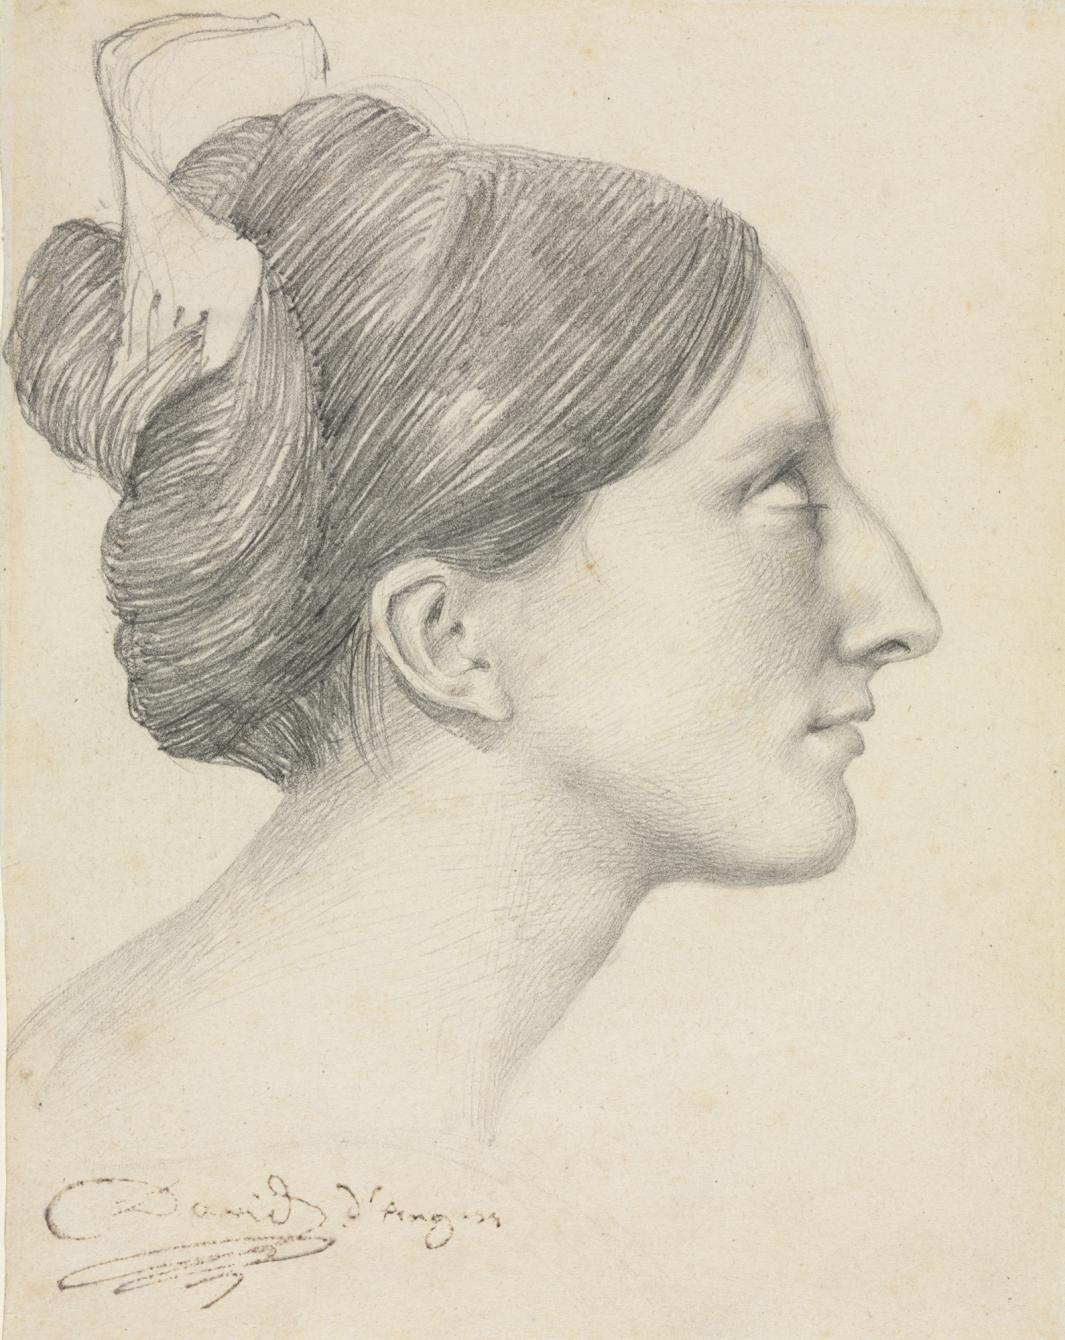 graphite drawing of a woman's head in profile, with hair pulled up